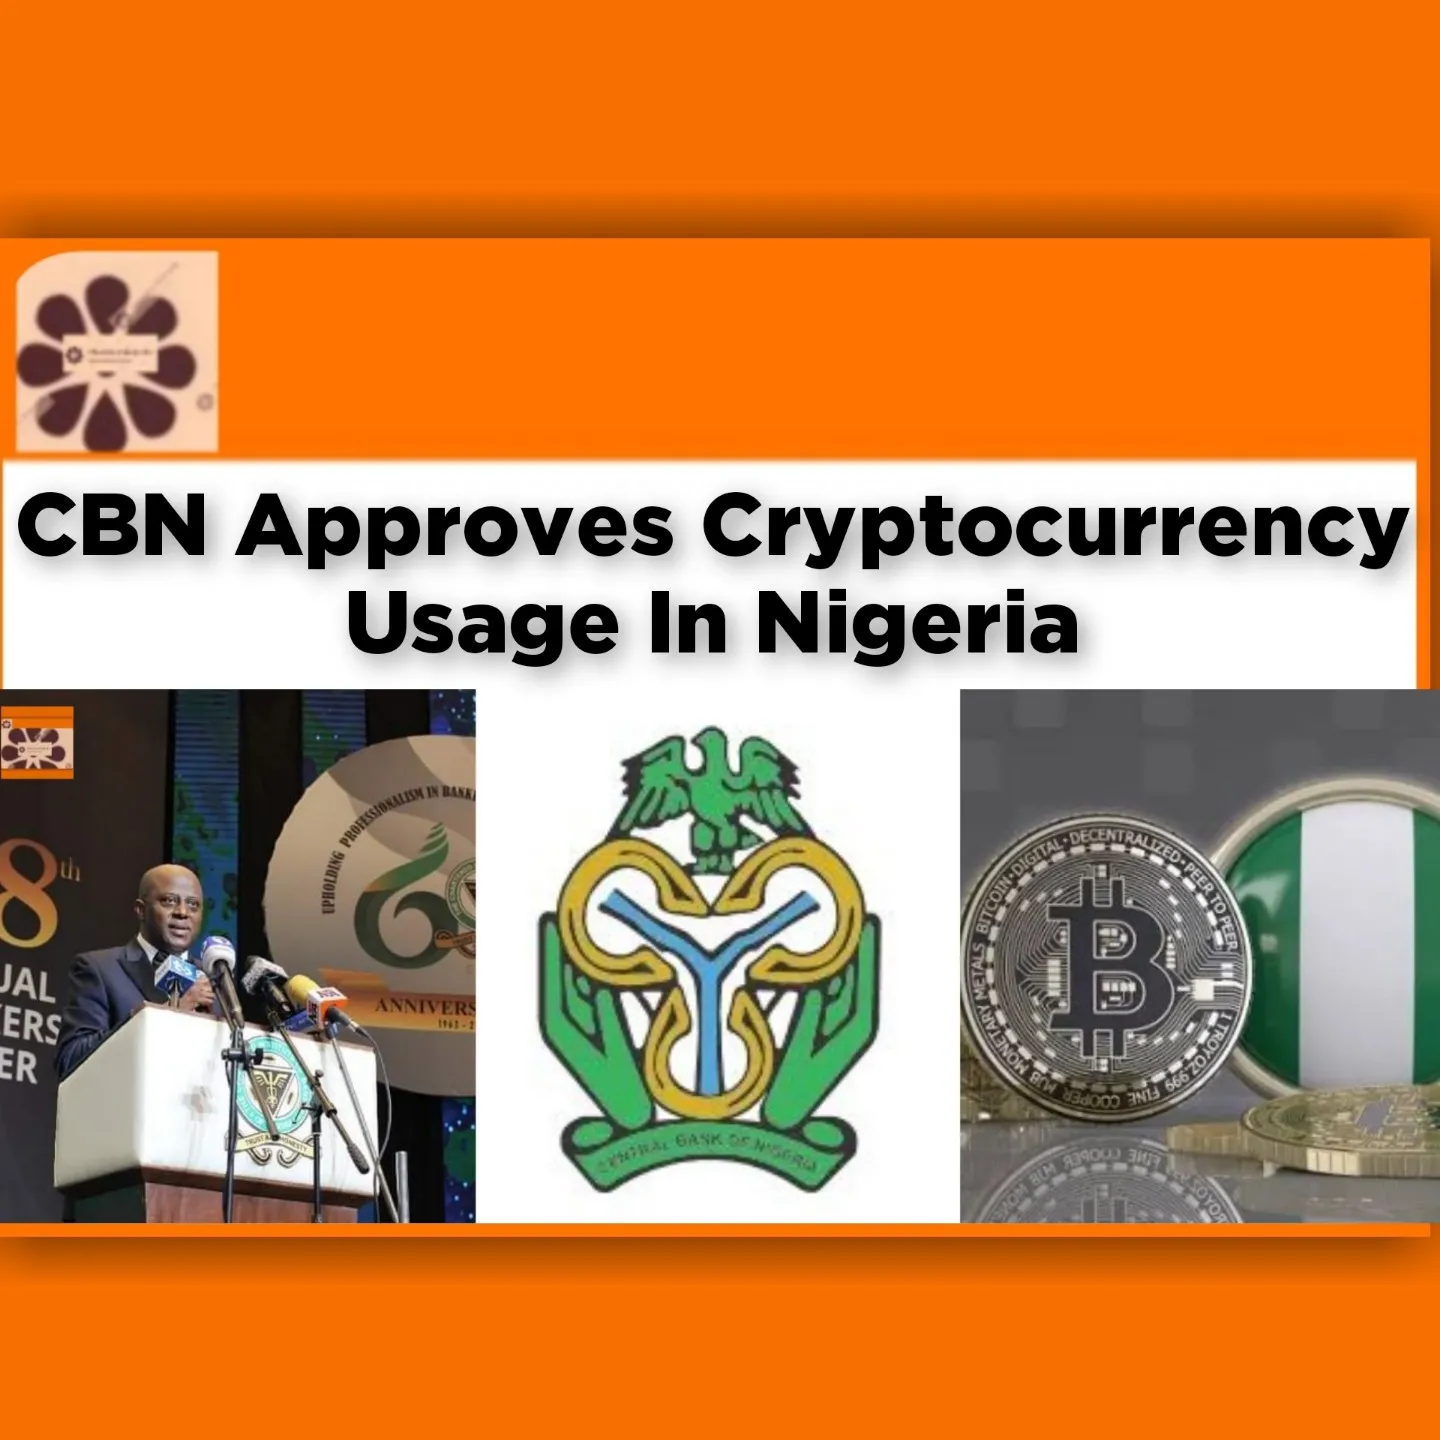 CBN Approves Cryptocurrency Usage In Nigeria ~ OsazuwaAkonedo #cbn #Cryptocurrency #Nigeria